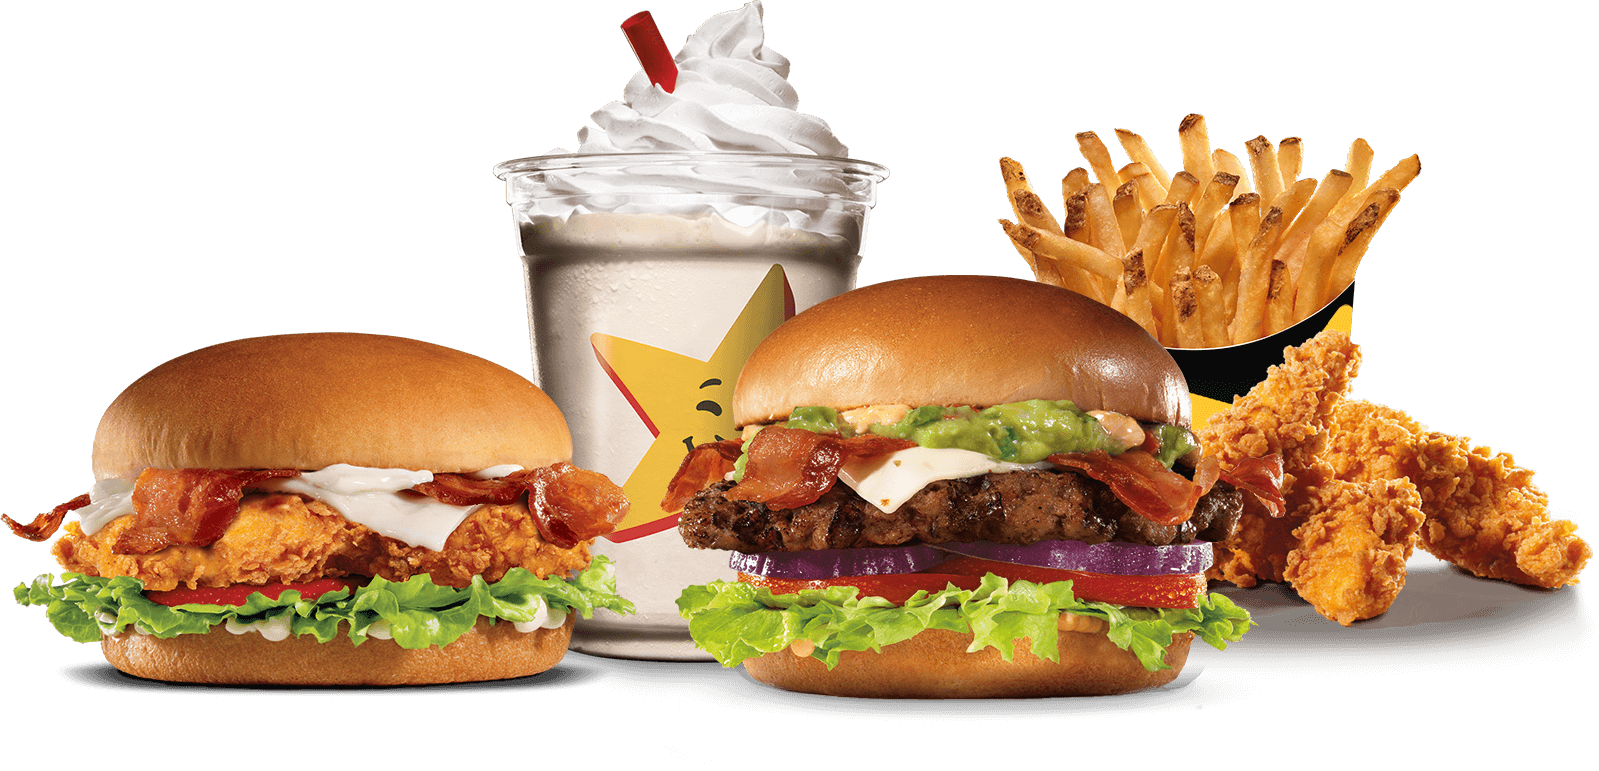 Best-In-Class menu featuring our Star Burgers lineup; premium 100% Angus Beef Thickburgers; Hand-Scooped Real Ice Cream Shakes; and Hand-Breaded Chicken Tenders